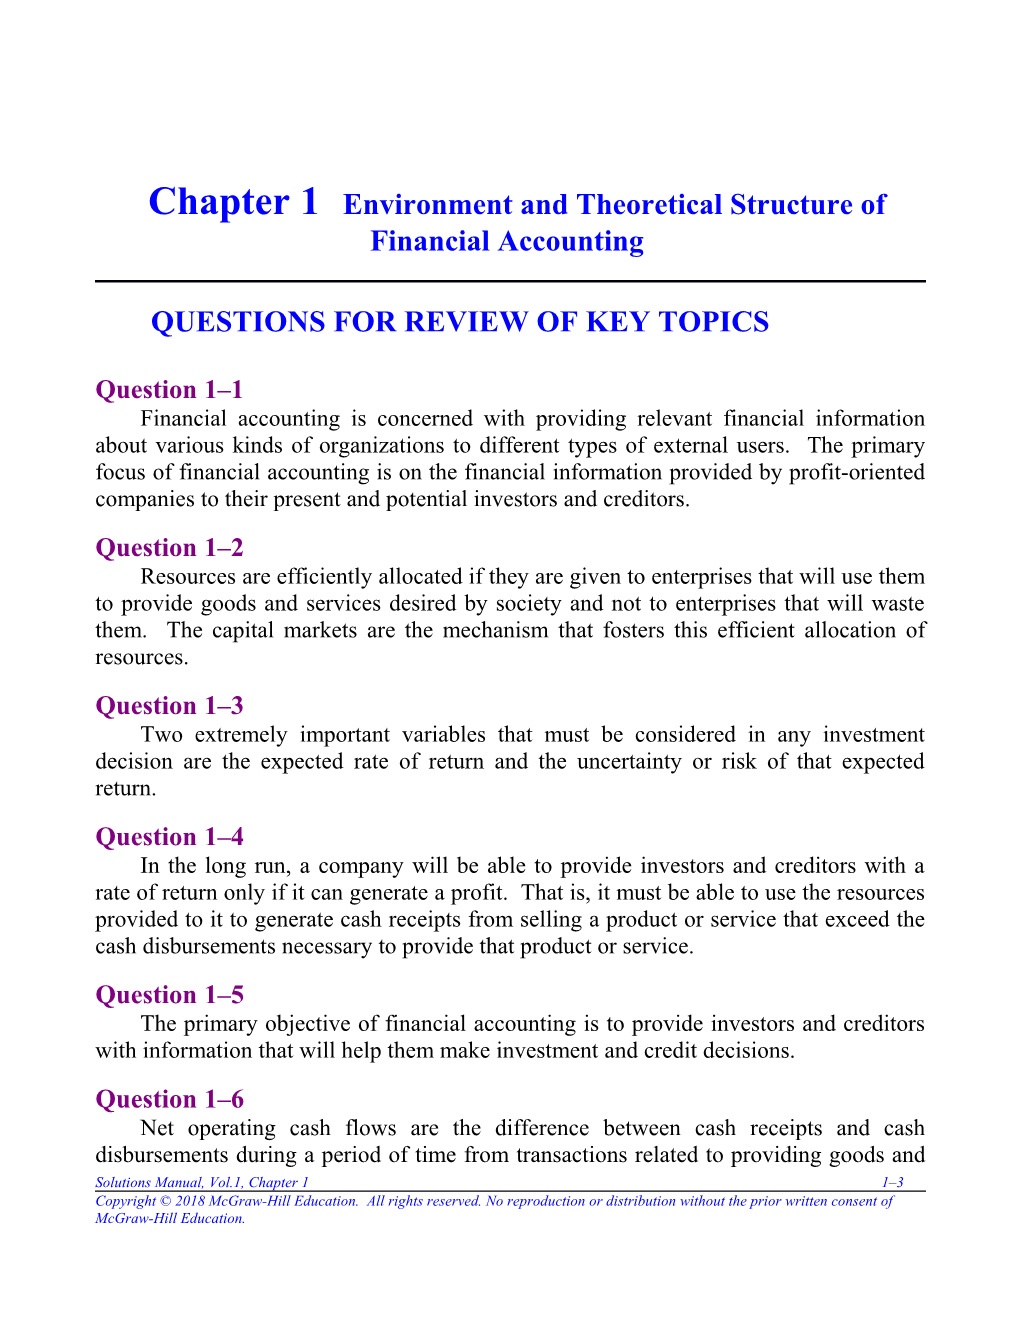 Chapter 1 Environment and Theoretical Structure of Financial Accounting